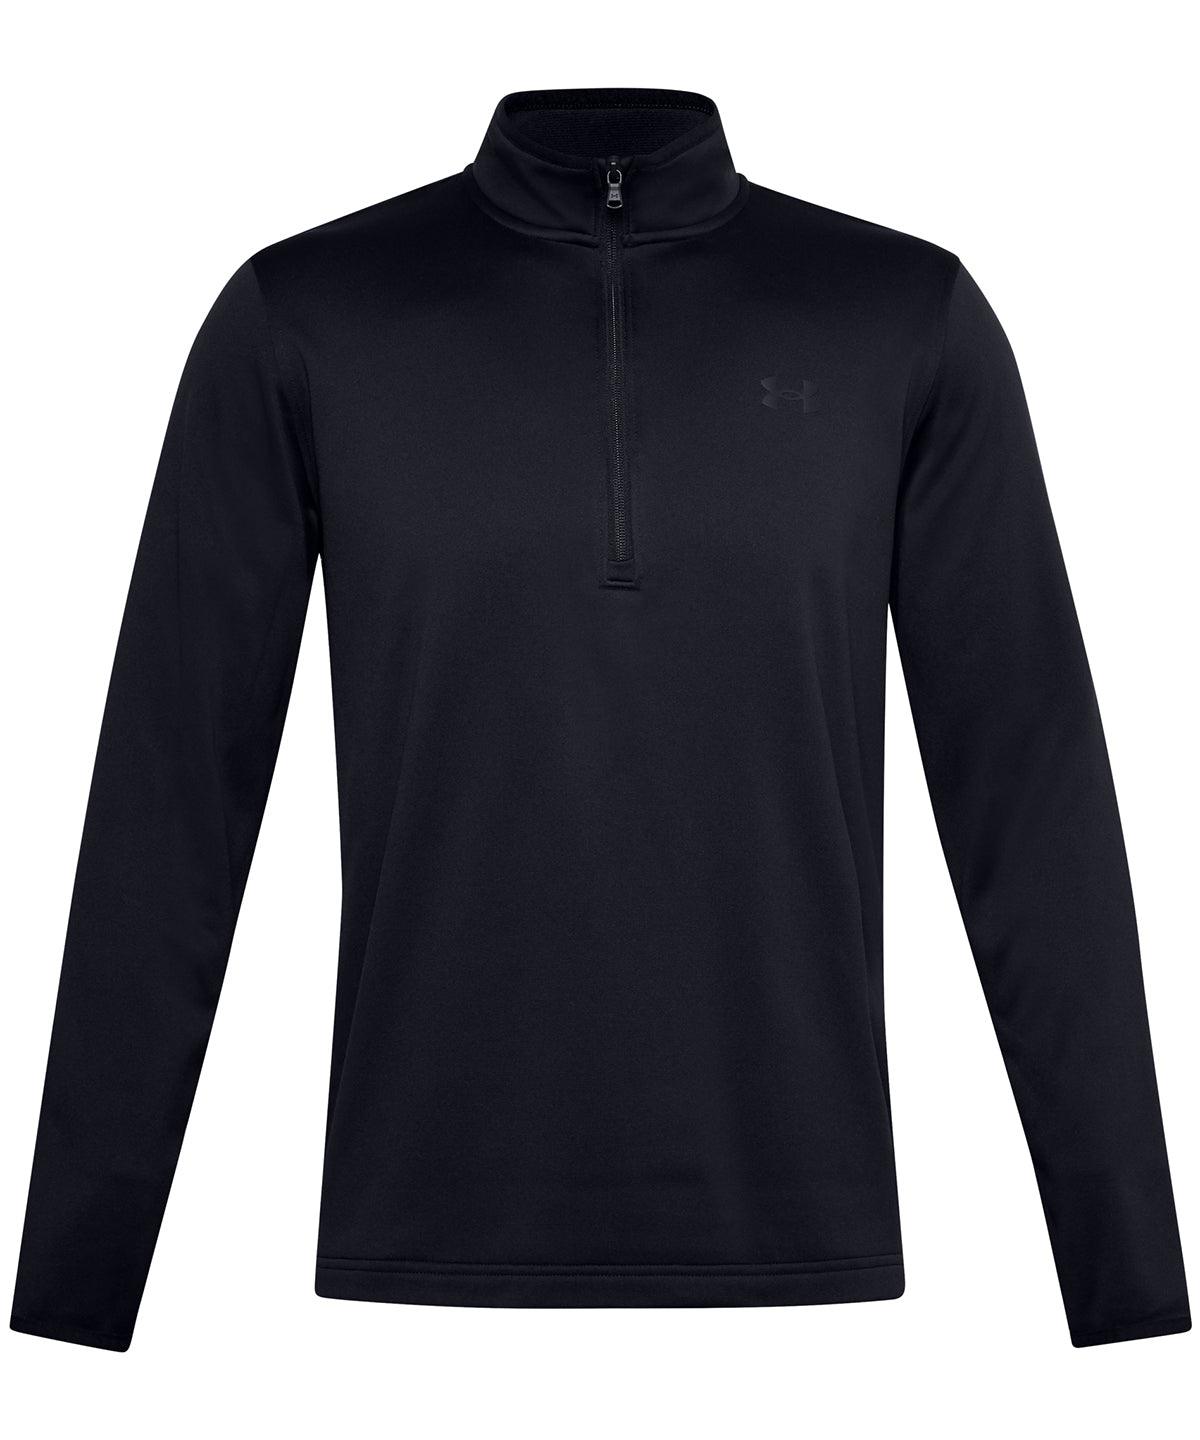 Black/Black - Armour fleece half zip Sports Overtops Under Armour Activewear & Performance, Exclusives, Jackets - Fleece, New For 2021, New Styles For 2021, Outdoor Sports, Plus Sizes, Sports & Leisure Schoolwear Centres